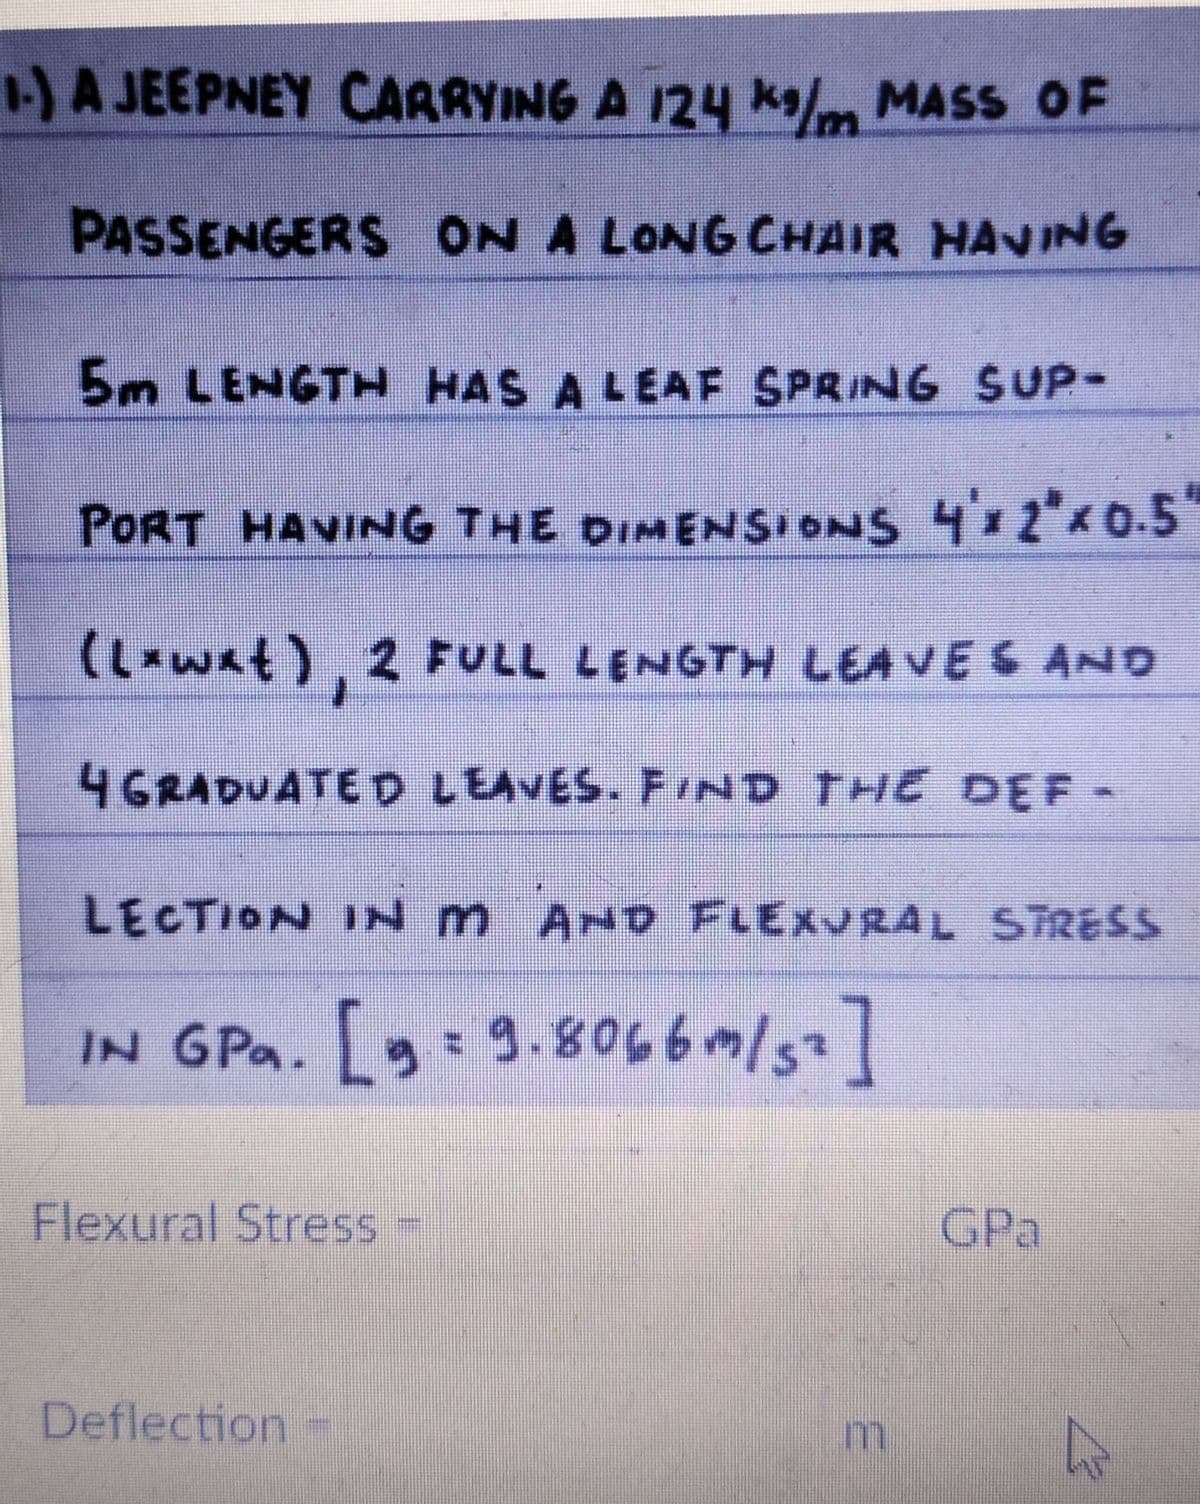 -)A JEEPNEY CARRYING A 124 ka/m MASS OF
PASSENGERS ON A LONG CHAIR HANING
5m LENGTH HAS A LEAF SPRING SUP-
PORT HAVING THE DIMENSIONS 4 2"0.5
(L-wat), 2 FULL LENGTH LEA VES AND
4GRADUATED LEAVES. FIND THE DEF-
LECTION IN m AND FLEXURAL S TRESS
IN GPa. [ 3.8066/s]
Flexural Stress =
GPa
Deflection
